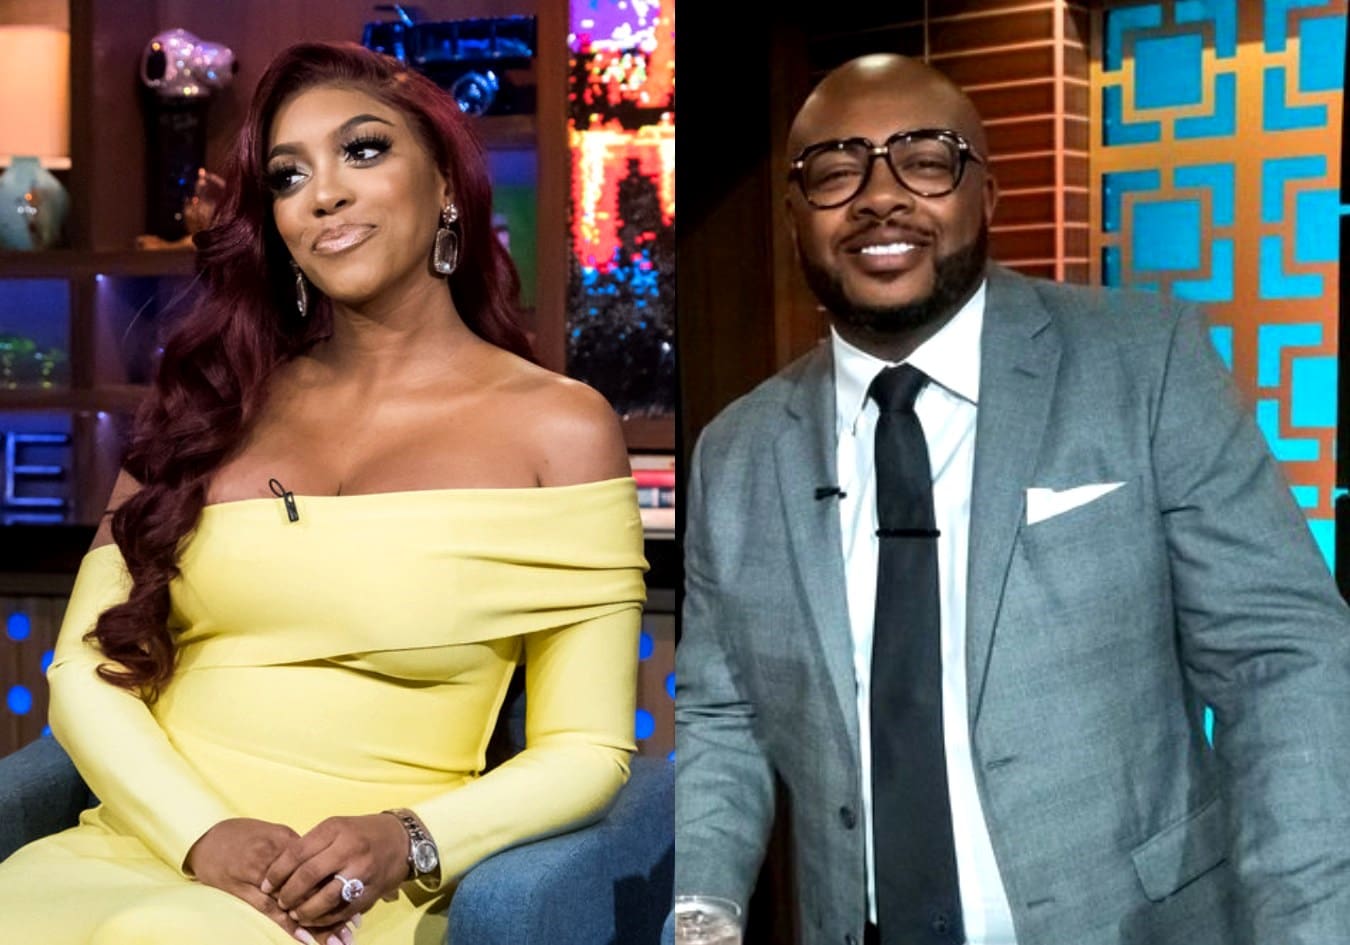 Porsha Williams Shuts Down Breakup Rumors And Shares A Photo In Which She And Dennis McKinley Have A Double Date Night With Tanya Sam And Her Beau